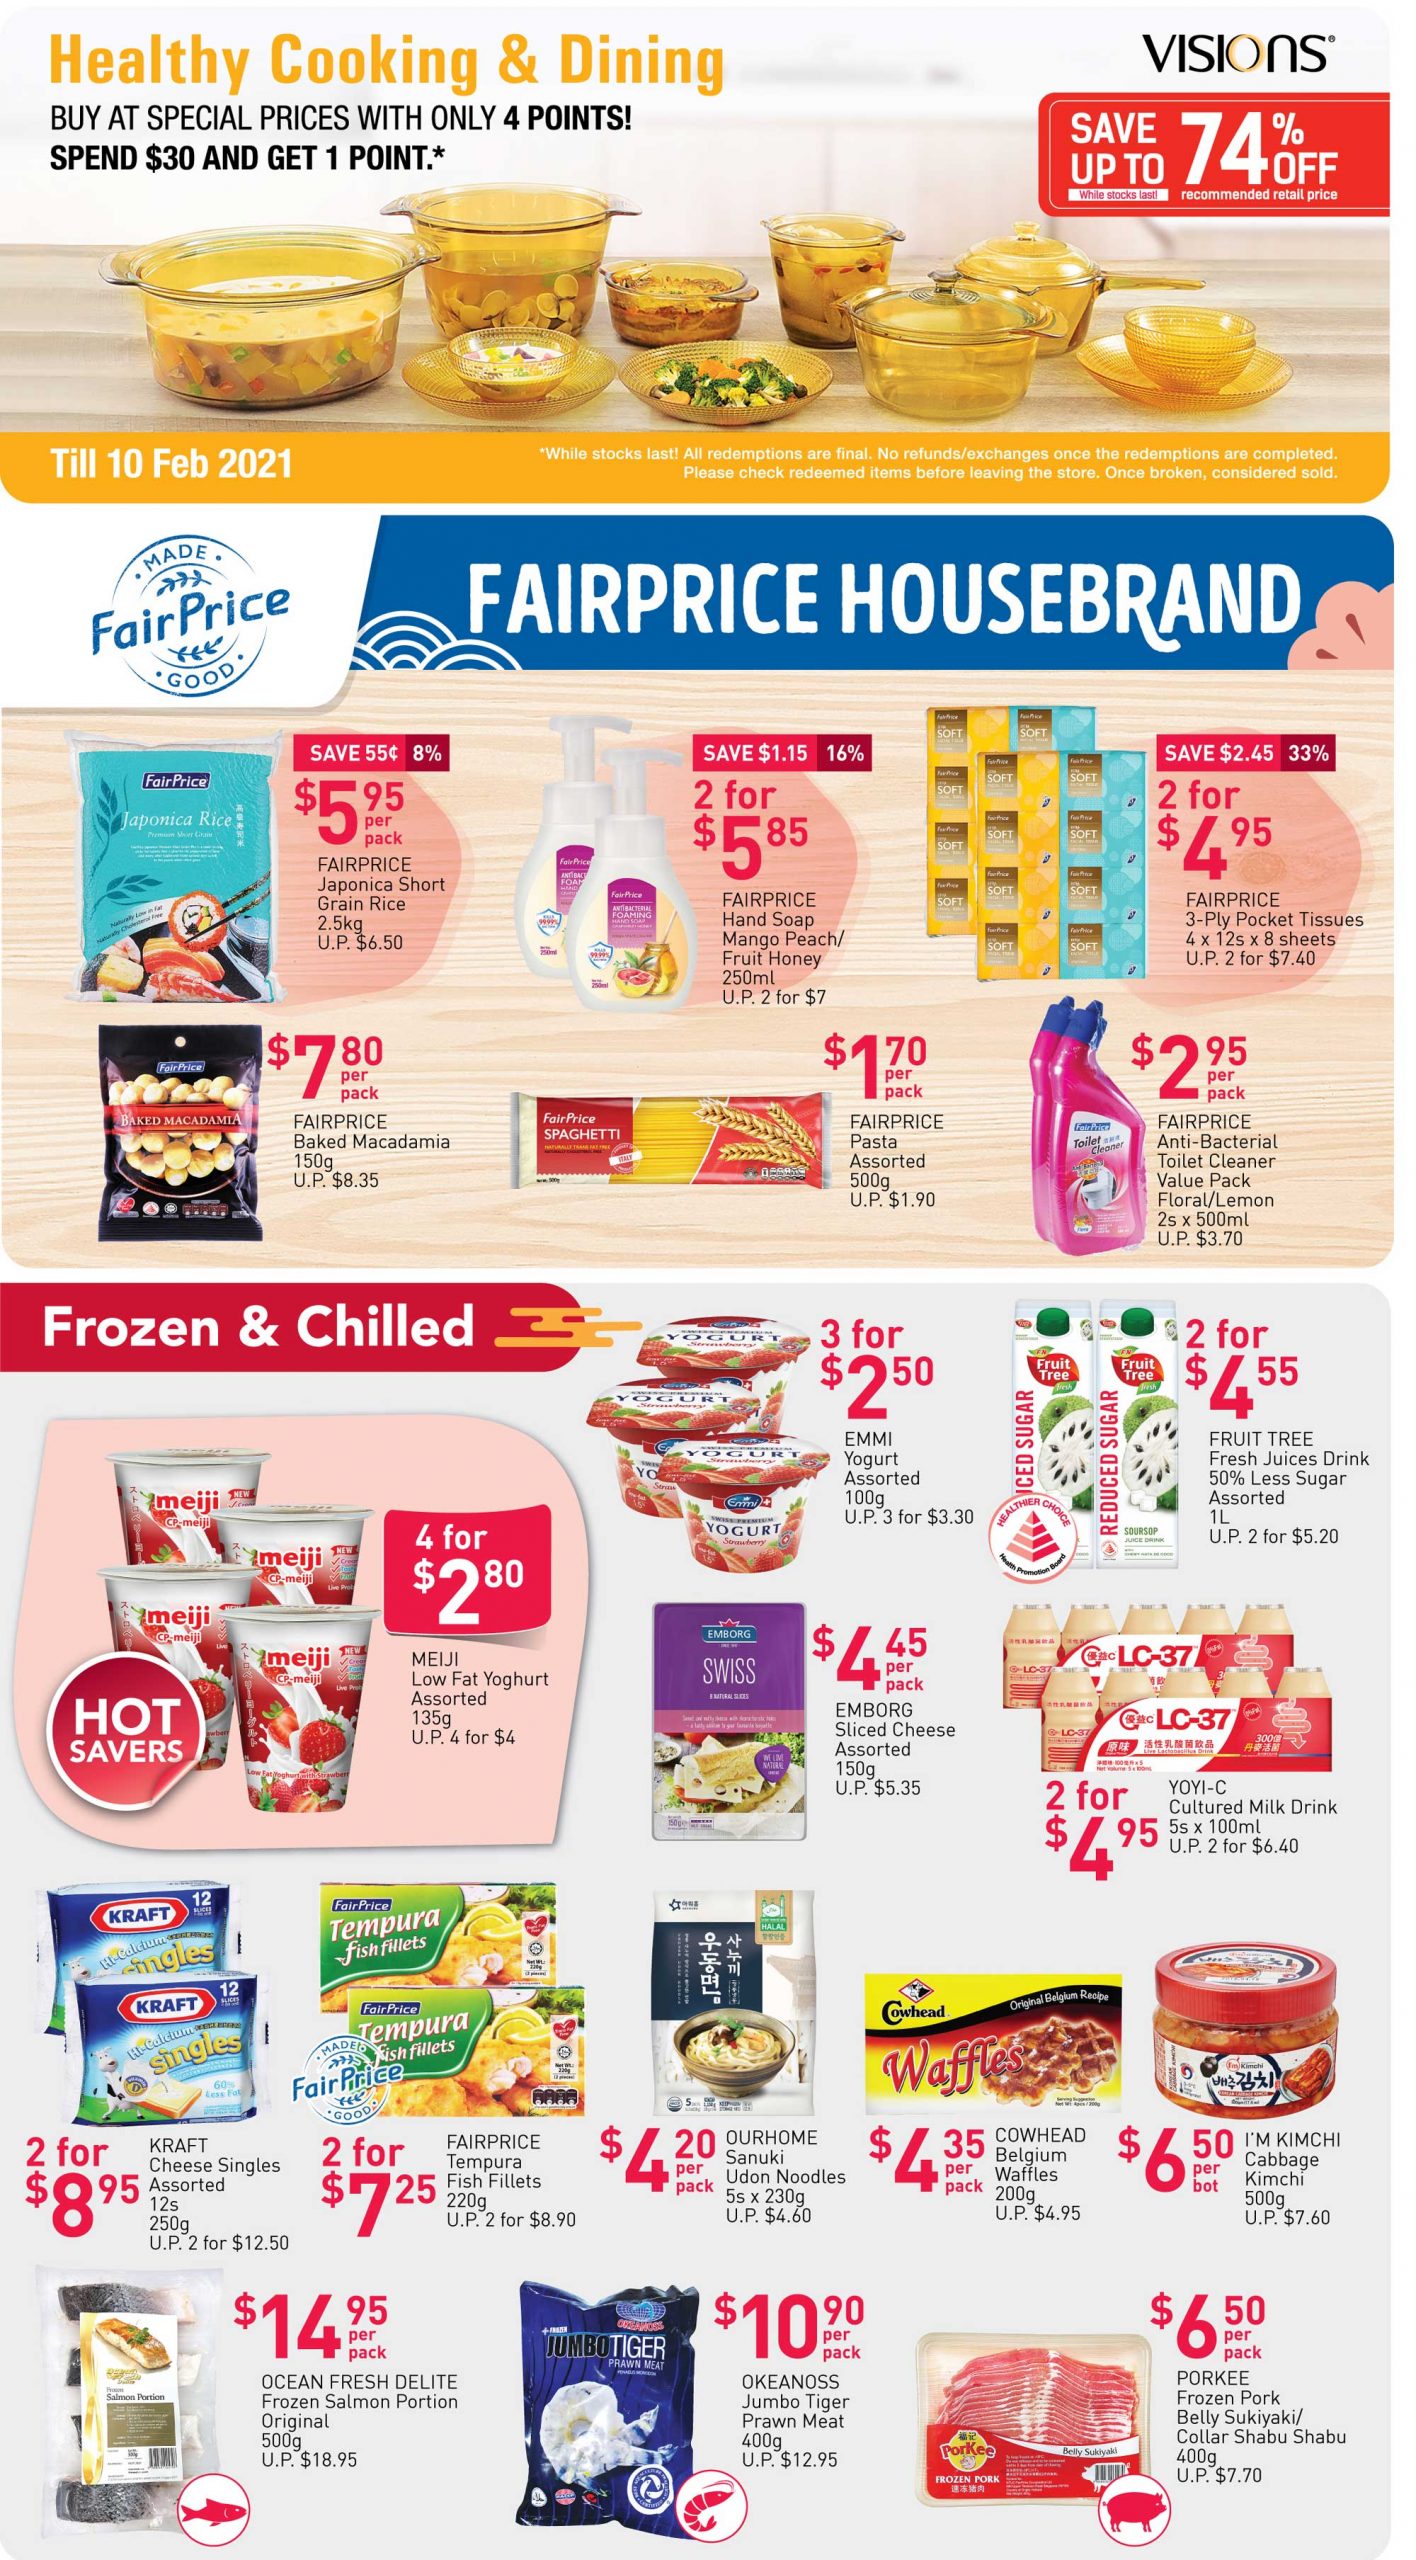 FairPrice’s weekly saver deals till 27 January 2021